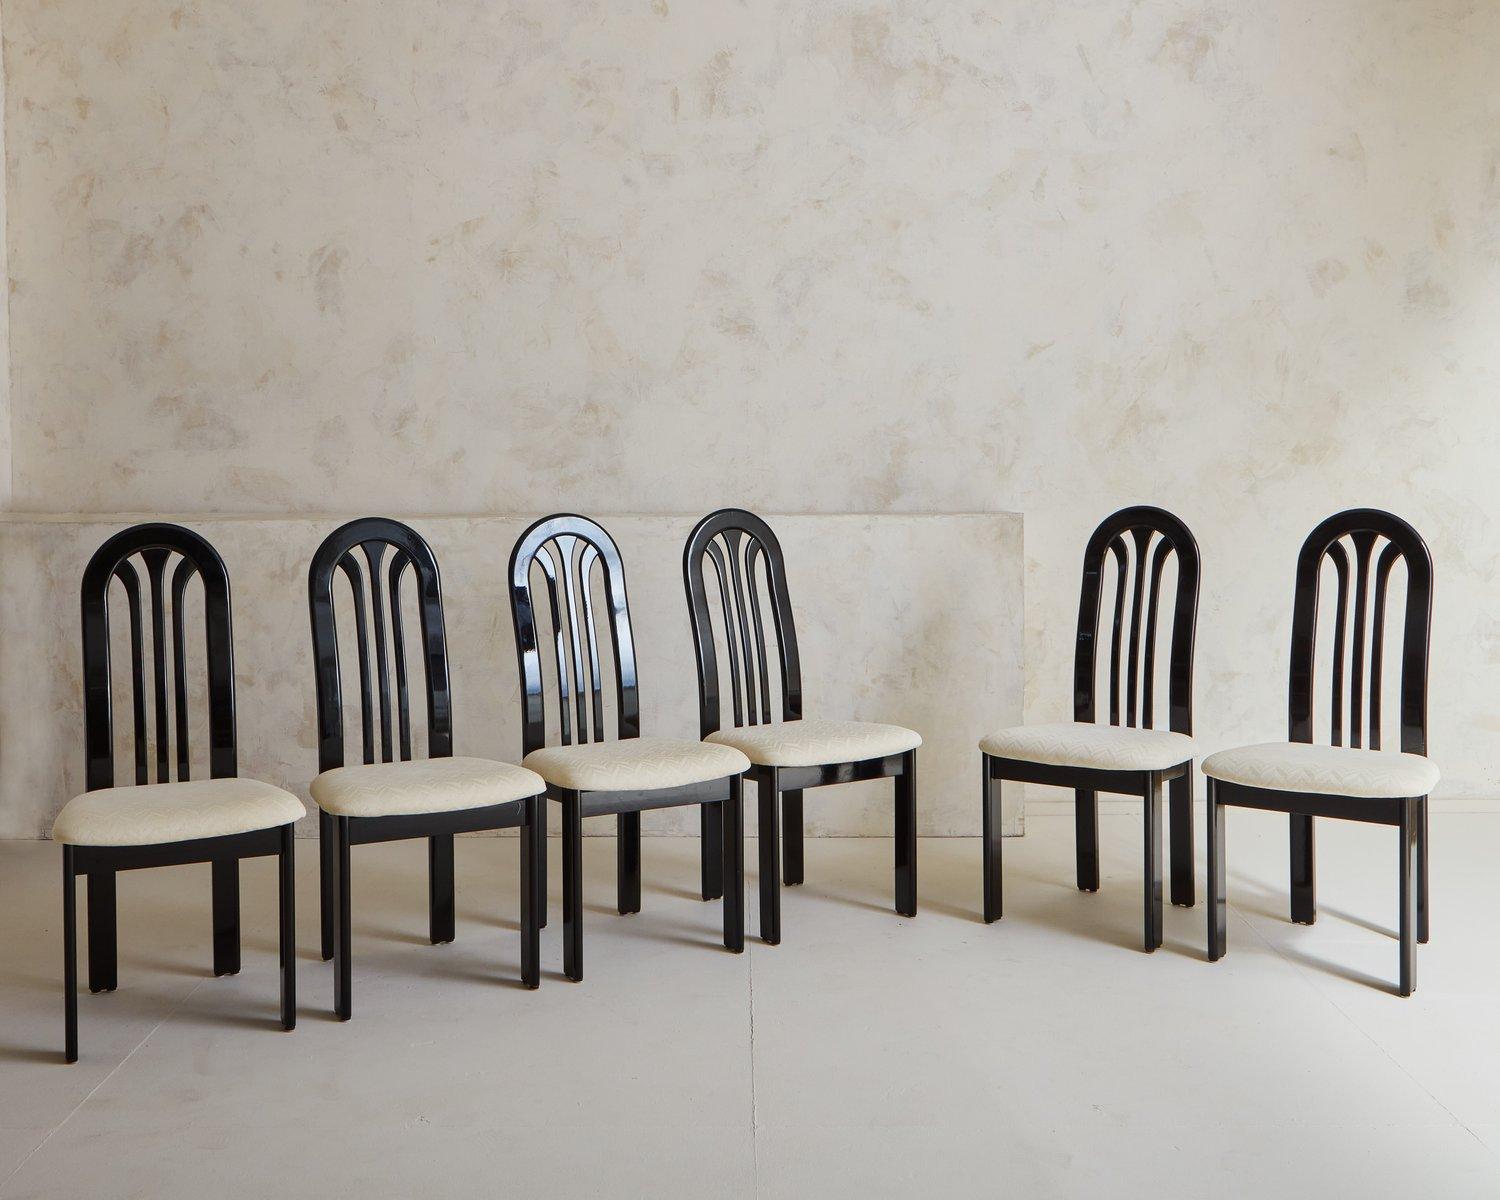 A set of 6 Postmodern 1980s black lacquered dining chairs by German manufacturer Lübke for Roche Bobois. These chairs feature curved backs and upholstered seats in original cream herringbone fabric.